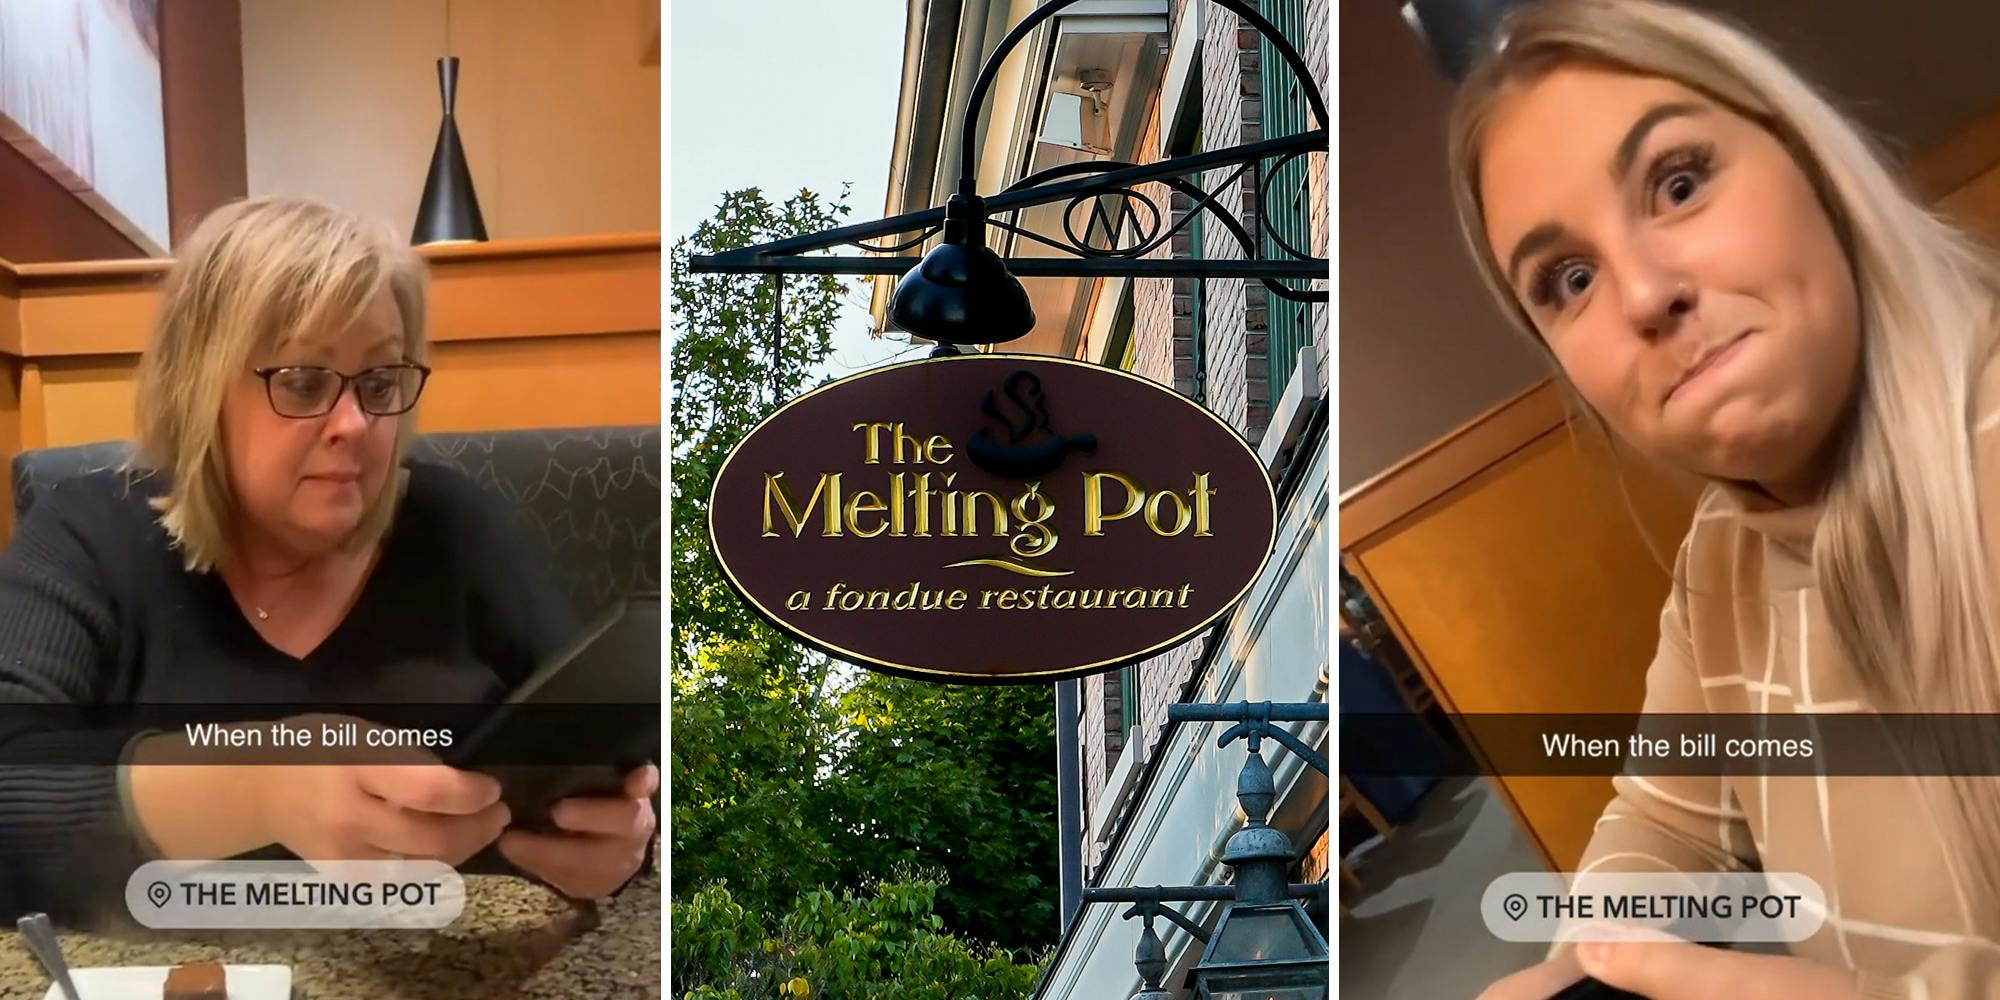 Customers laugh in disbelief after getting bill at the Melting Pot